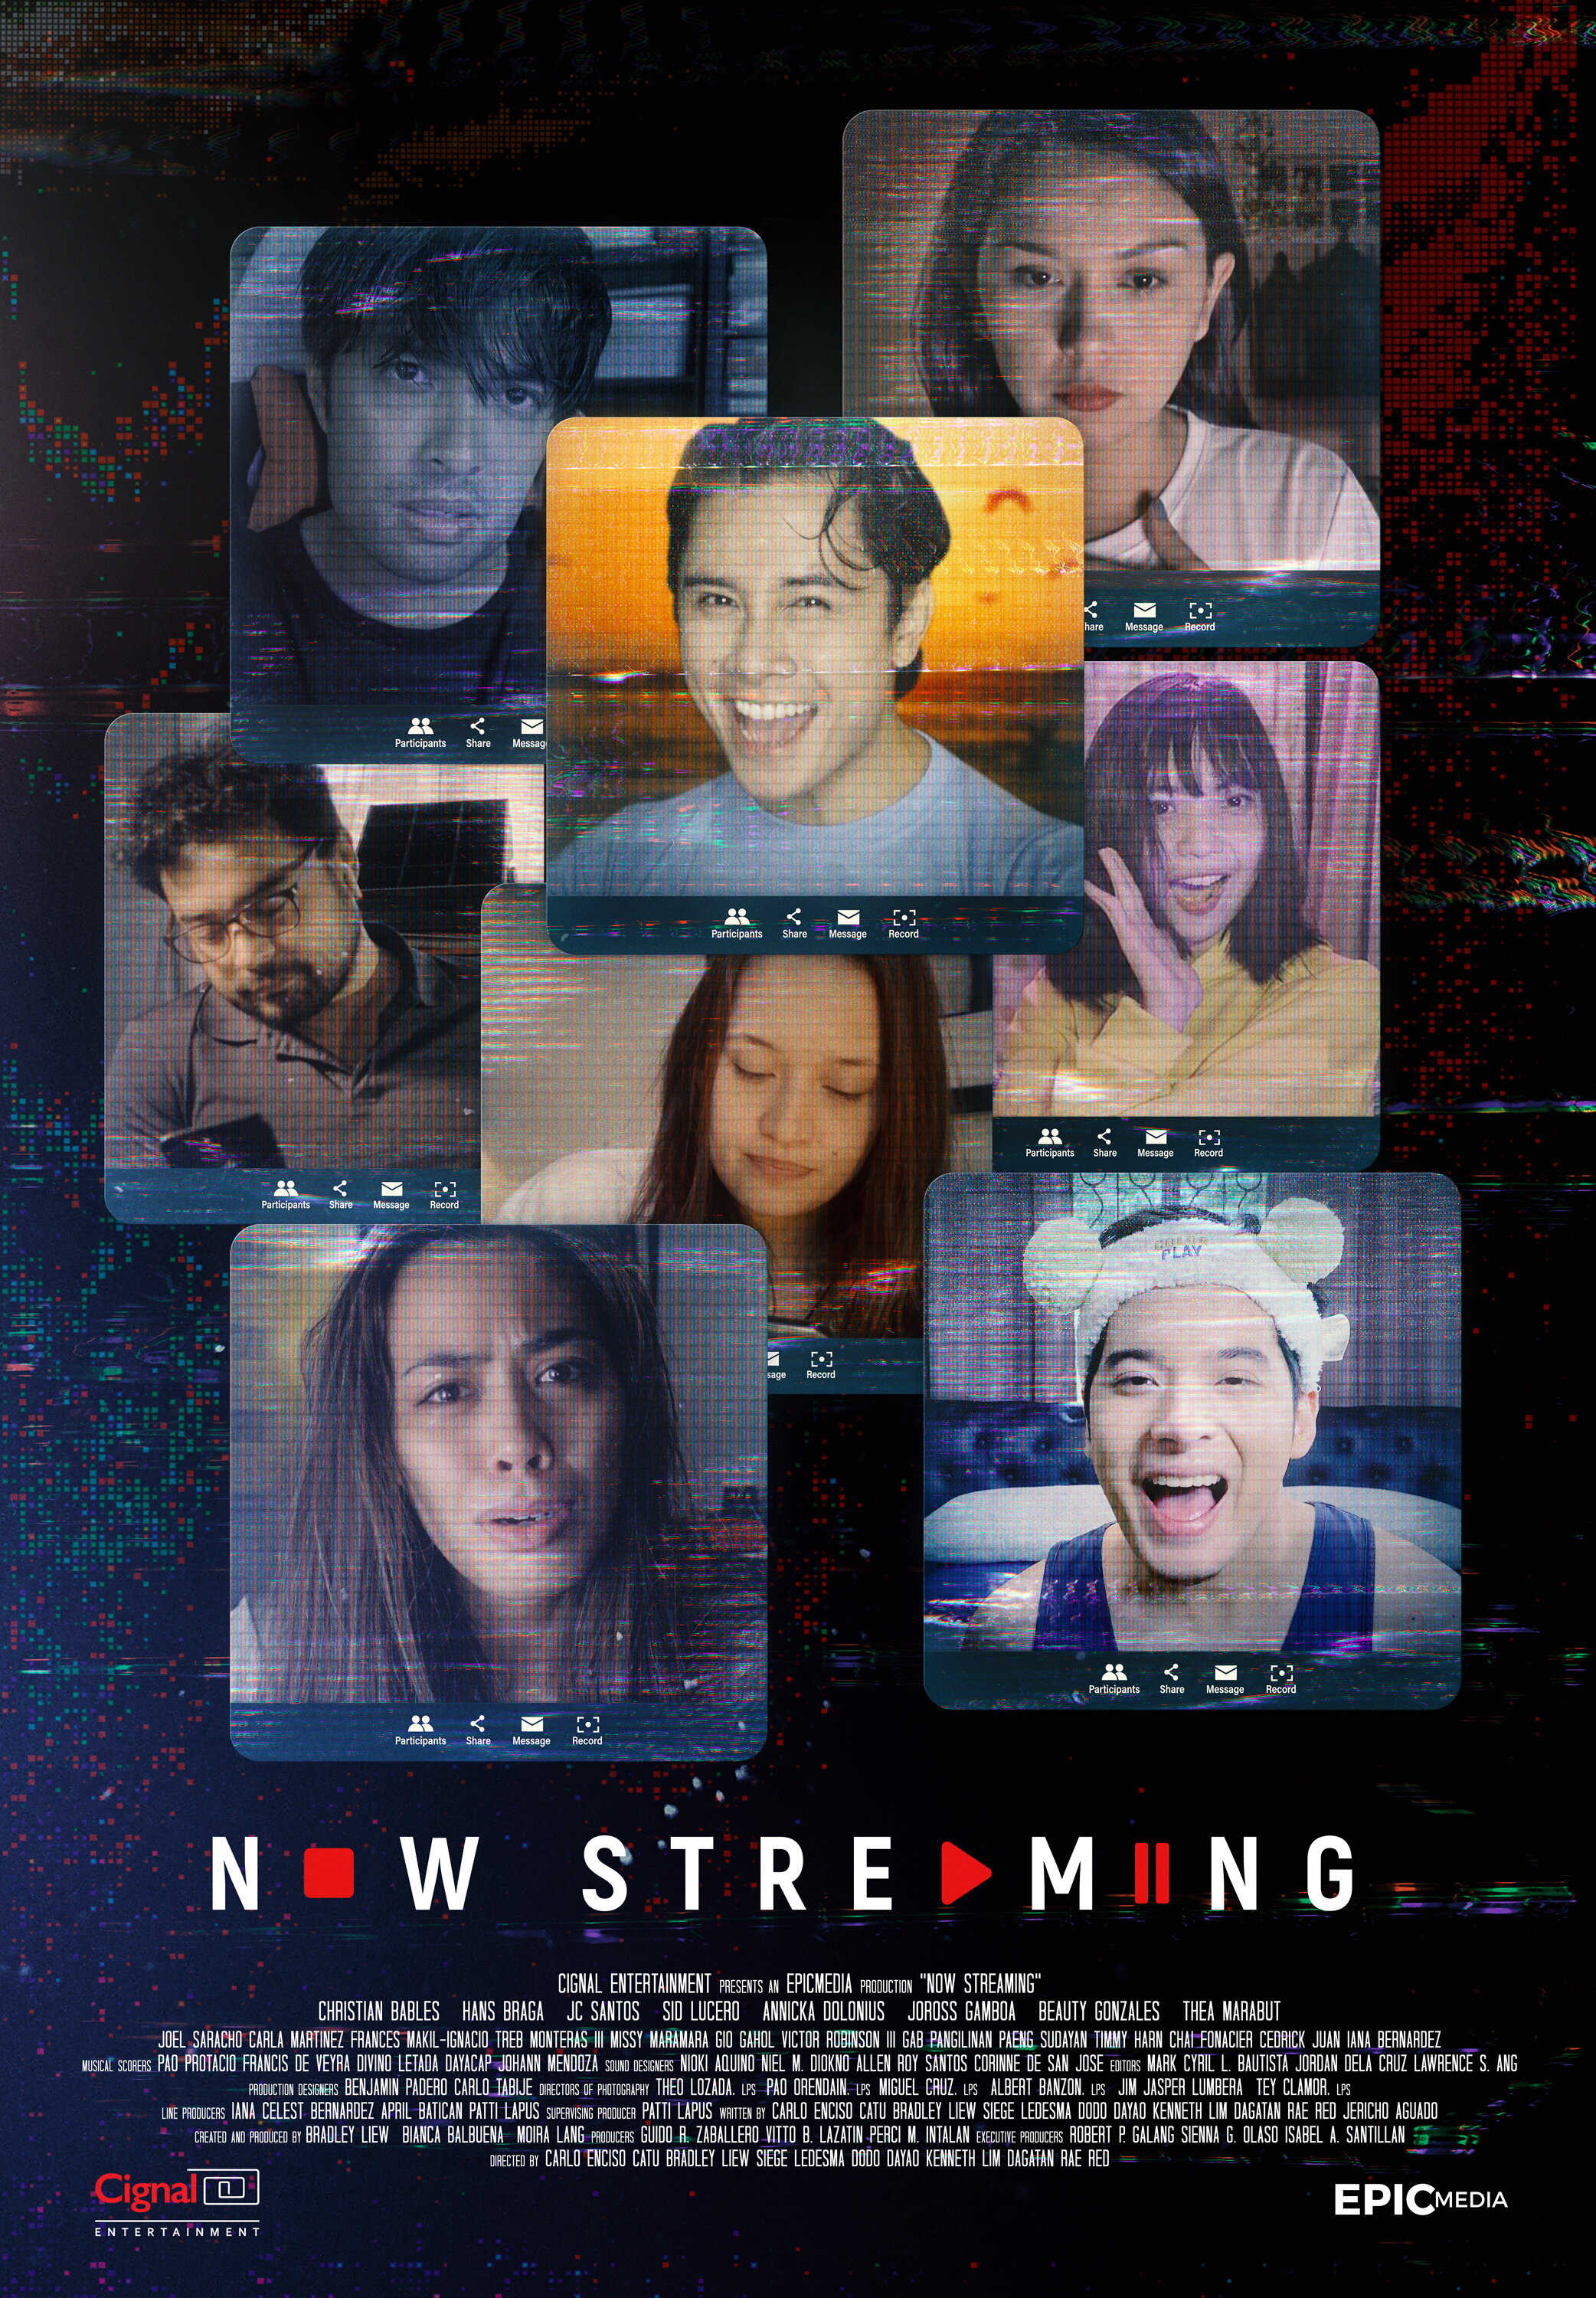 Now Streaming